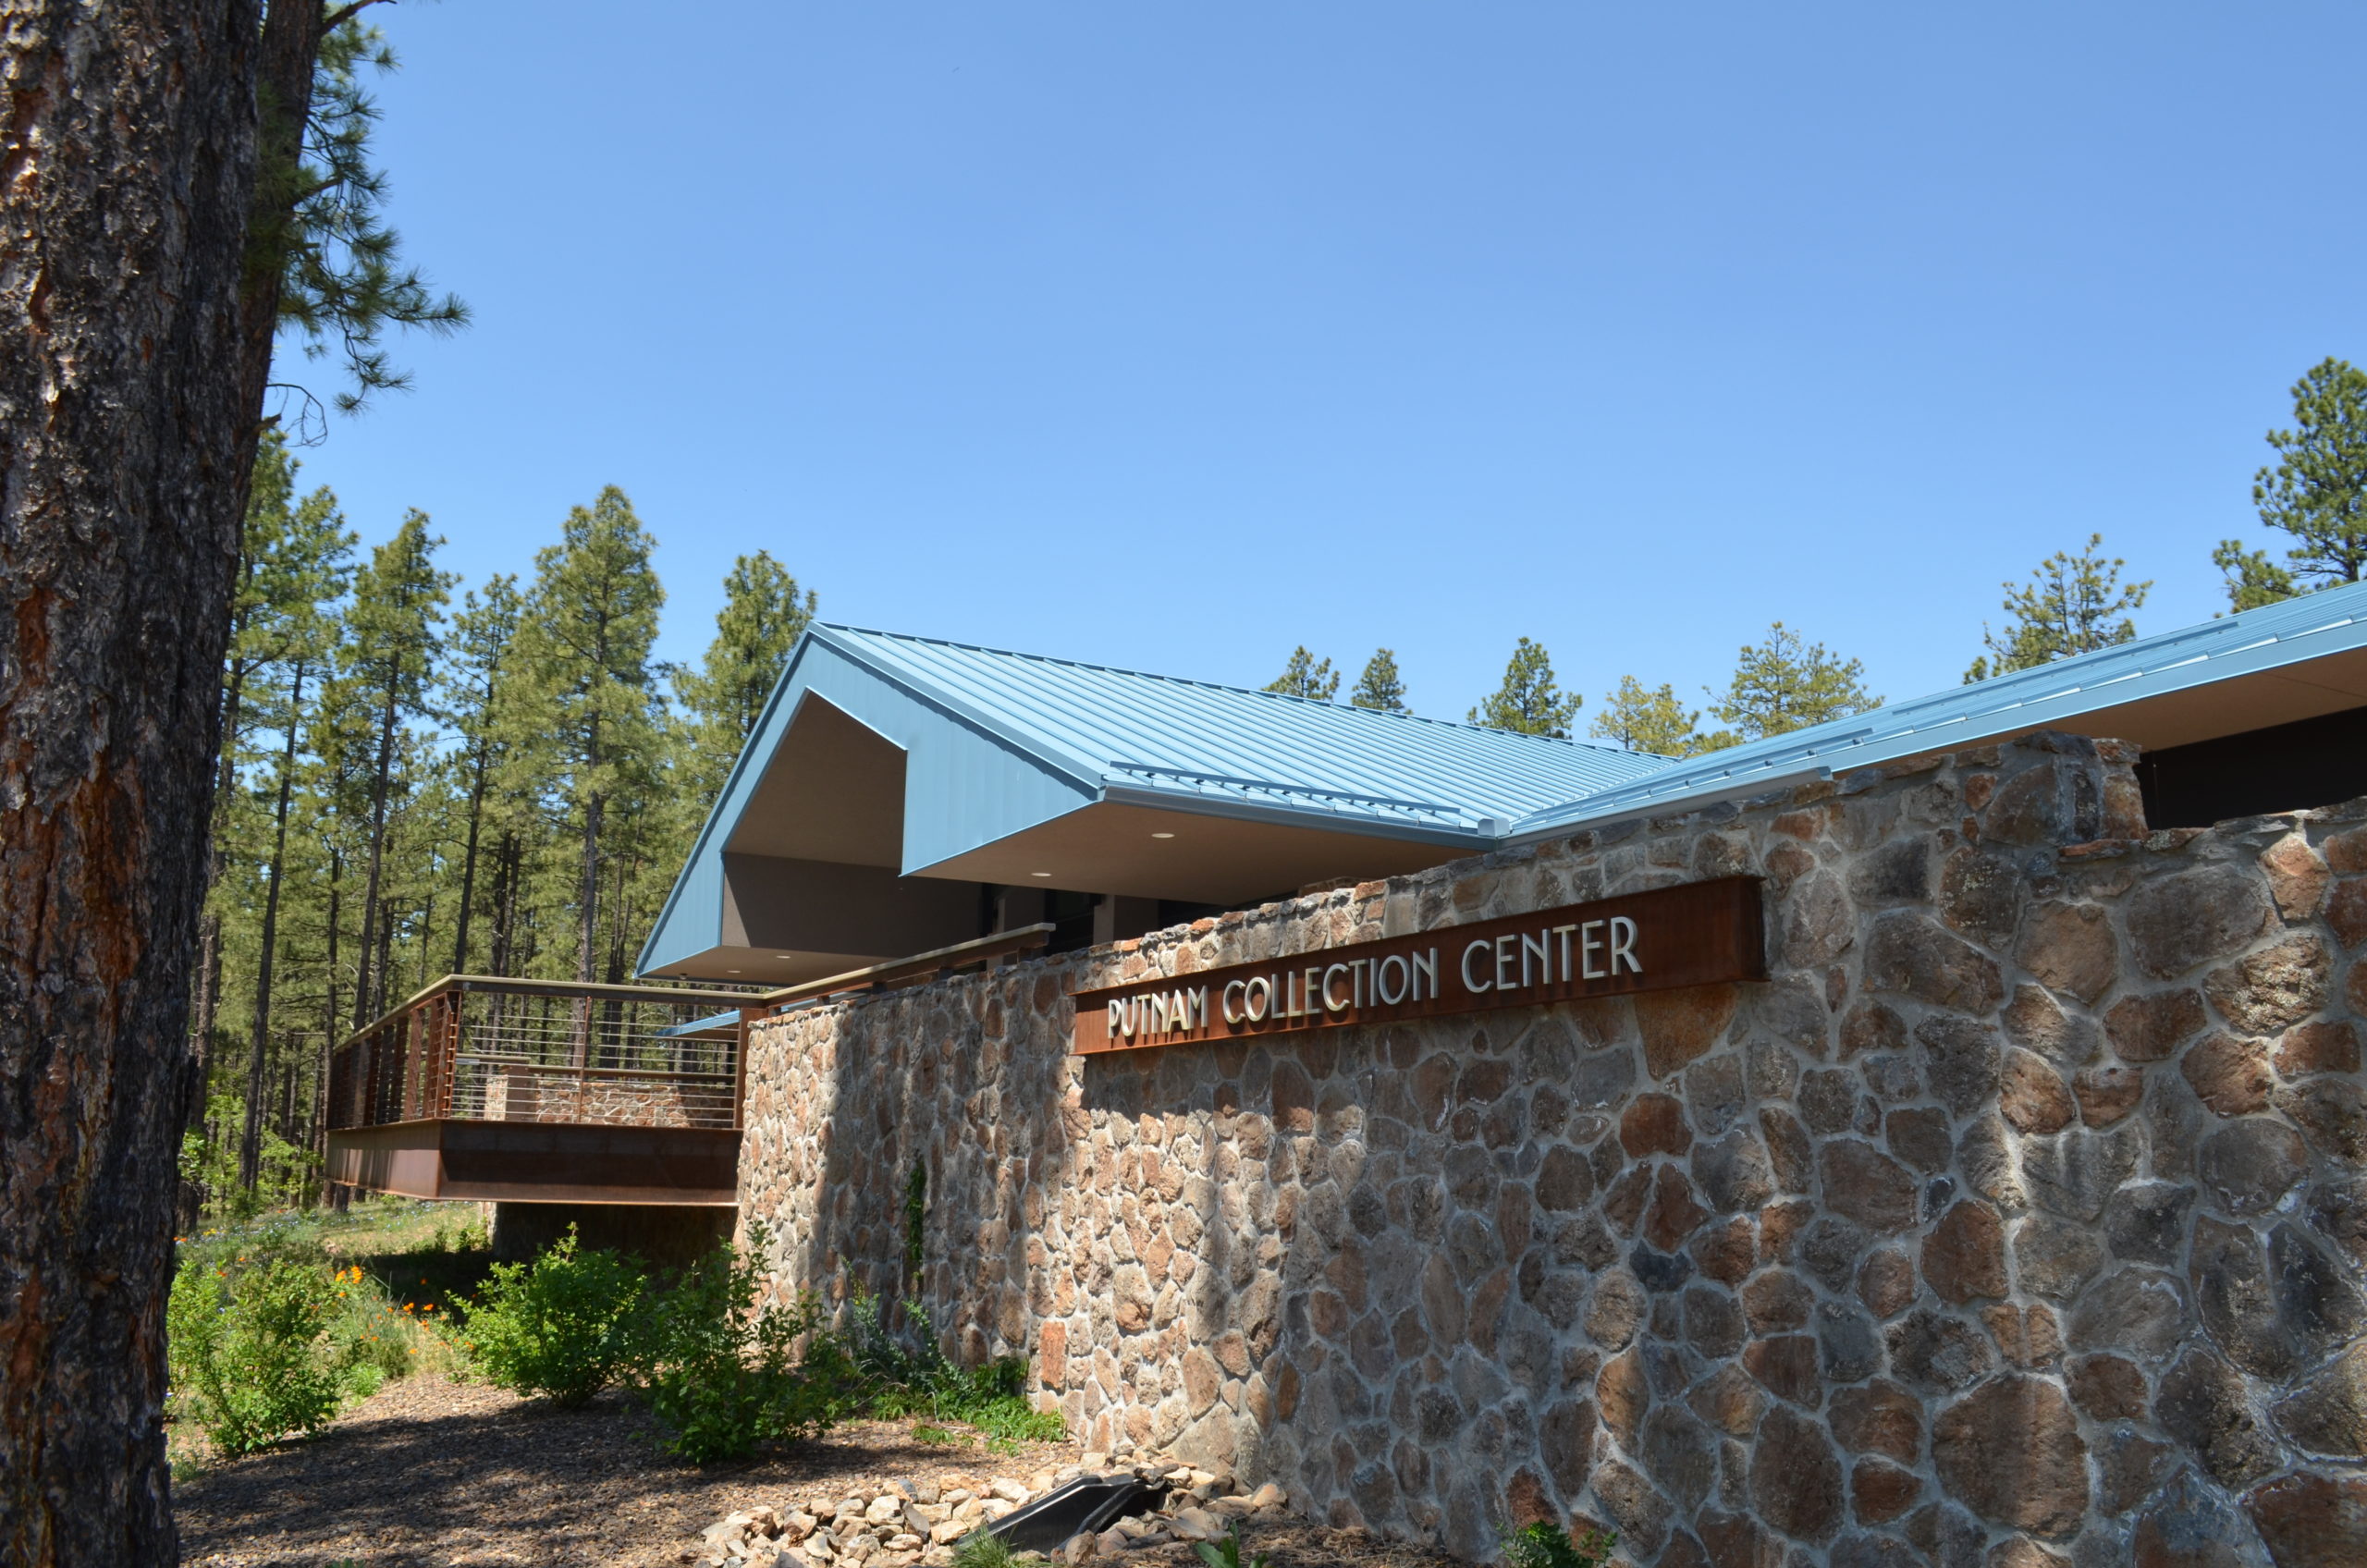 Lowell Observatory's Putnam Collection Center